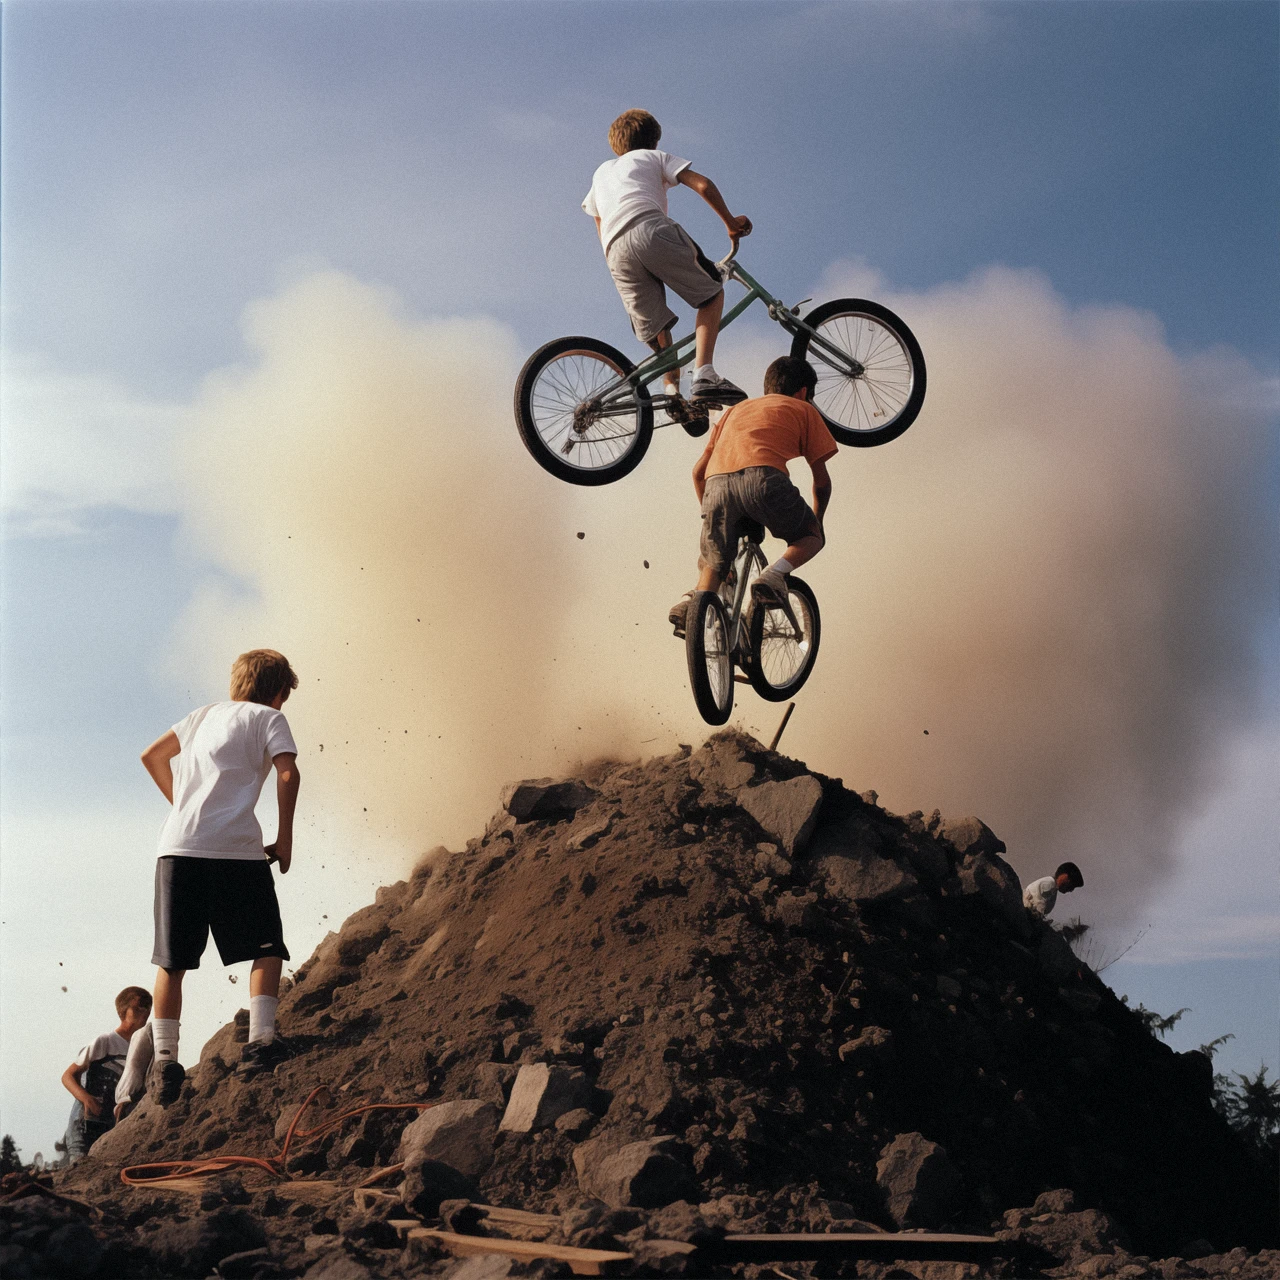 A photograph of two boys launching themselves into the air on bxm bikes off of a dirt mound